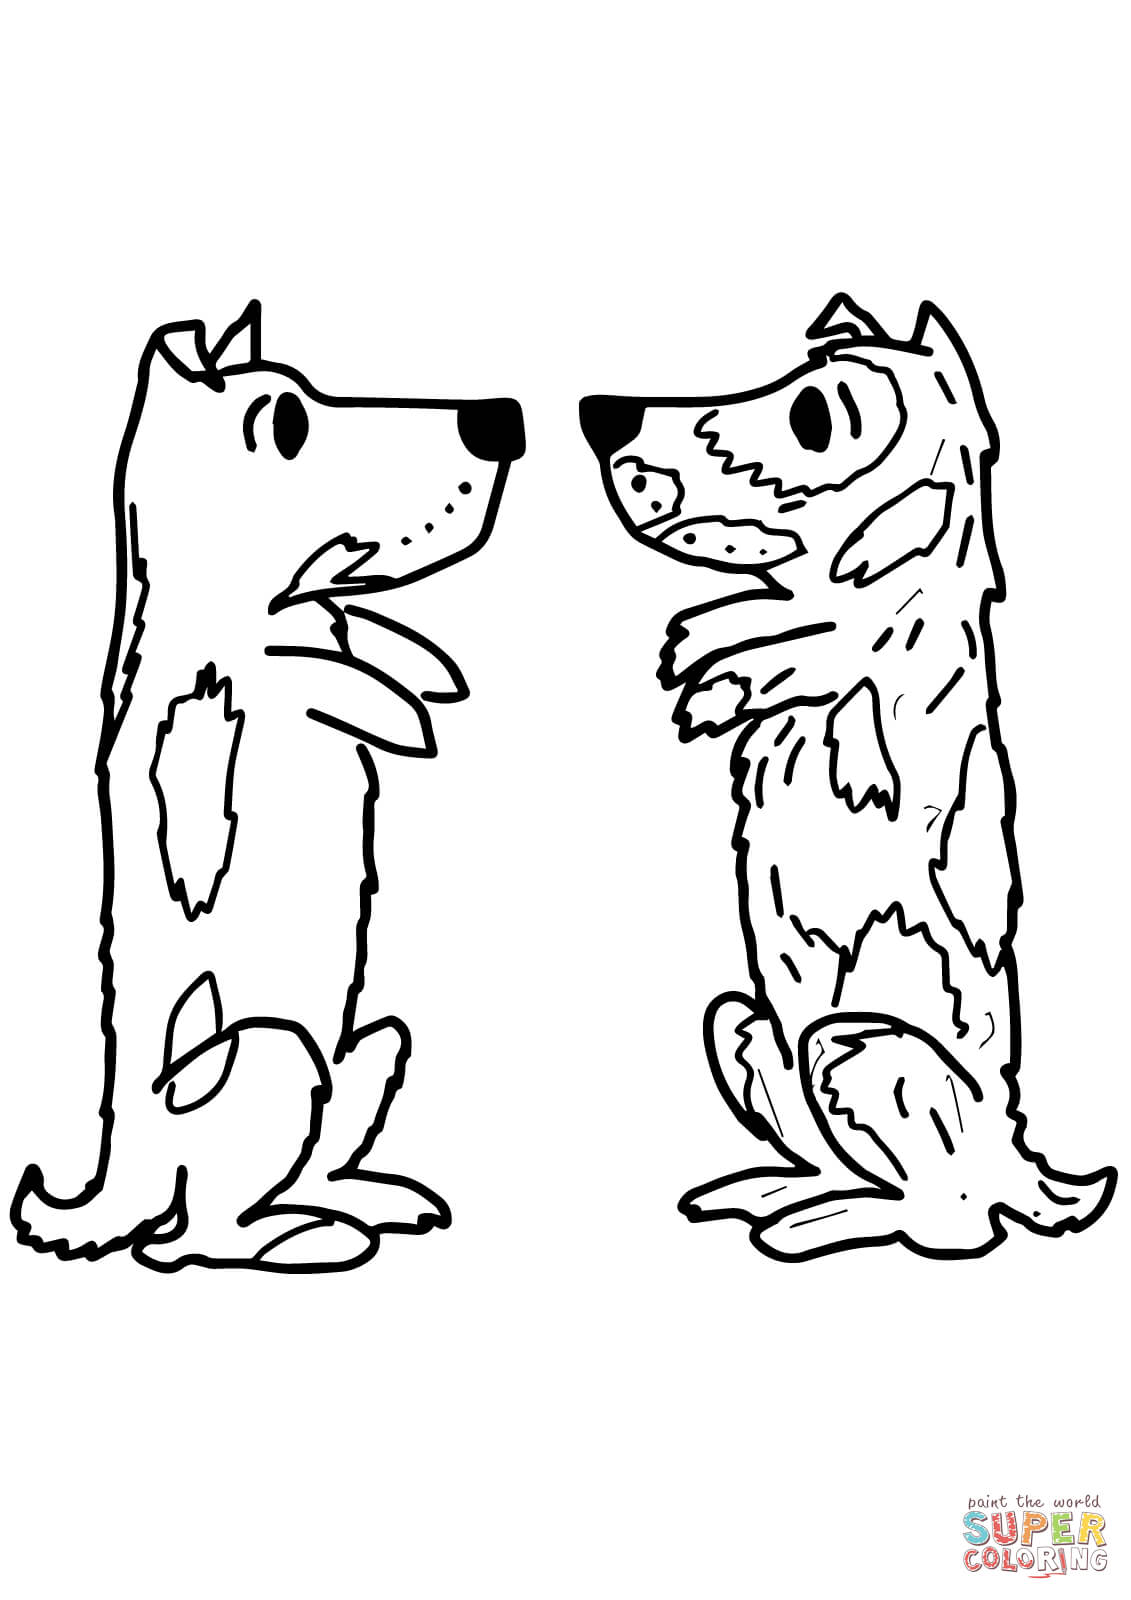 Harry the dog clean and dirty coloring page free printable coloring pages